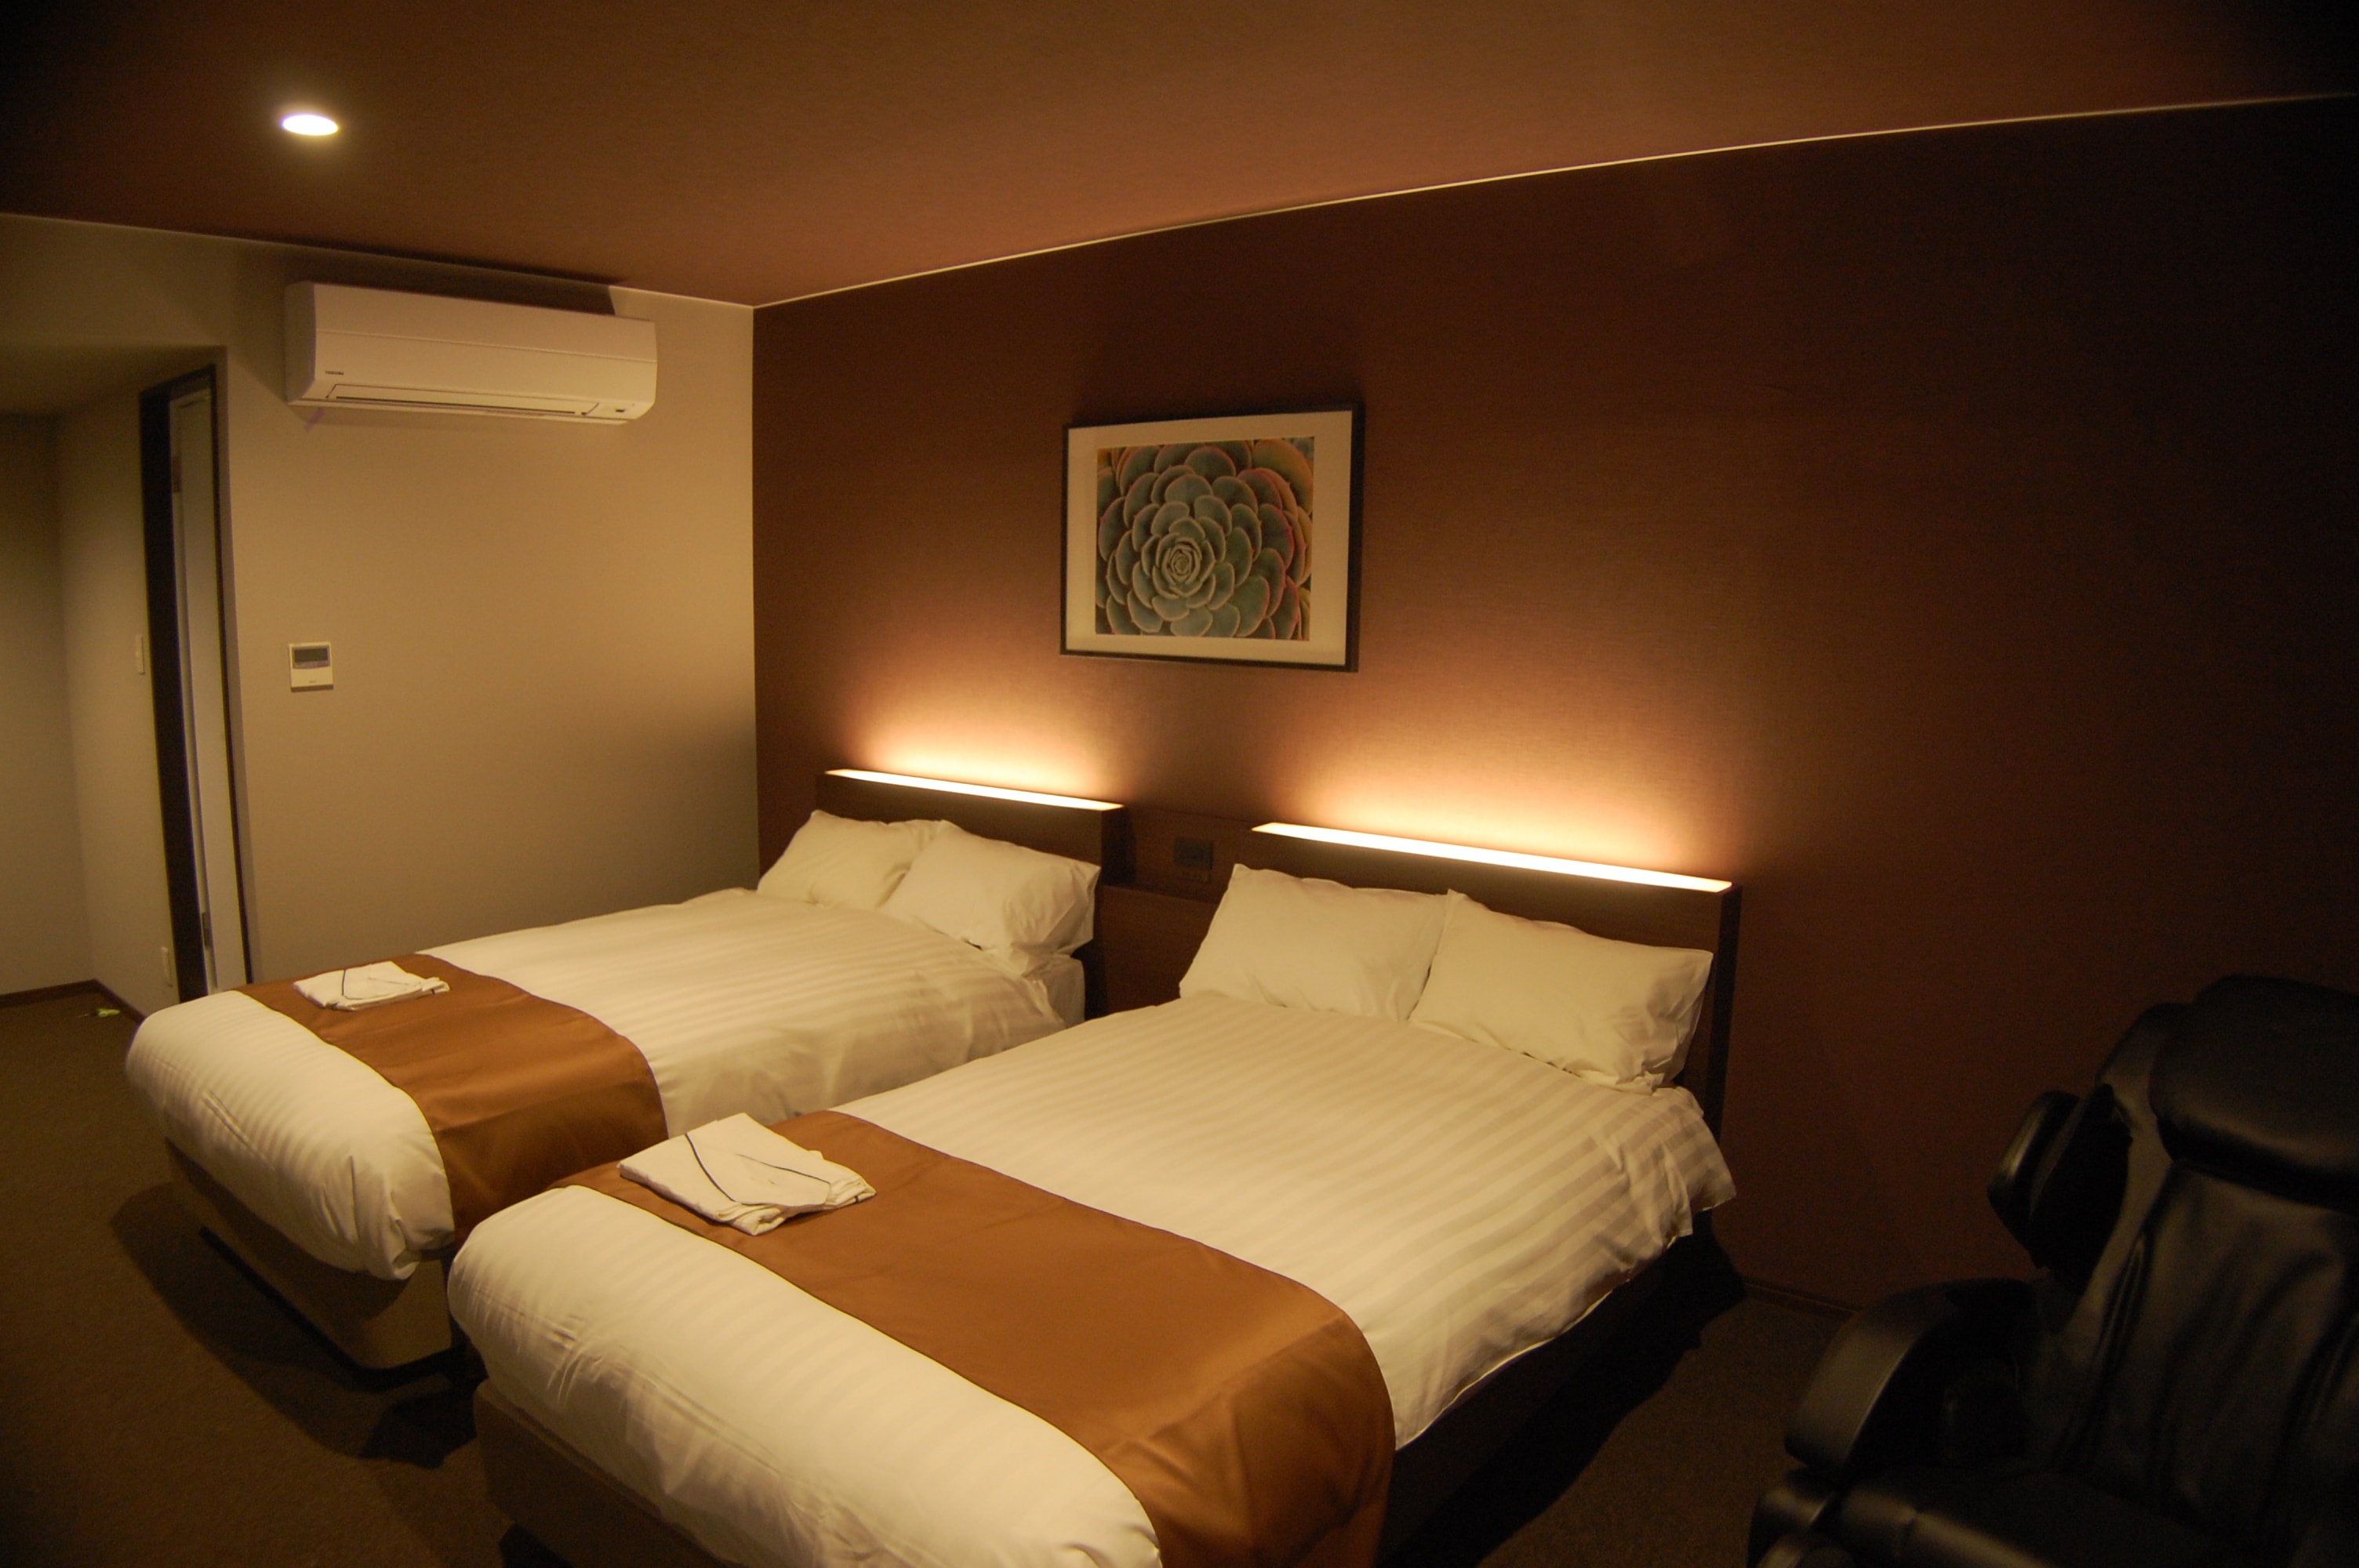 Twin room 28-30㎡, where you can relax and relax.